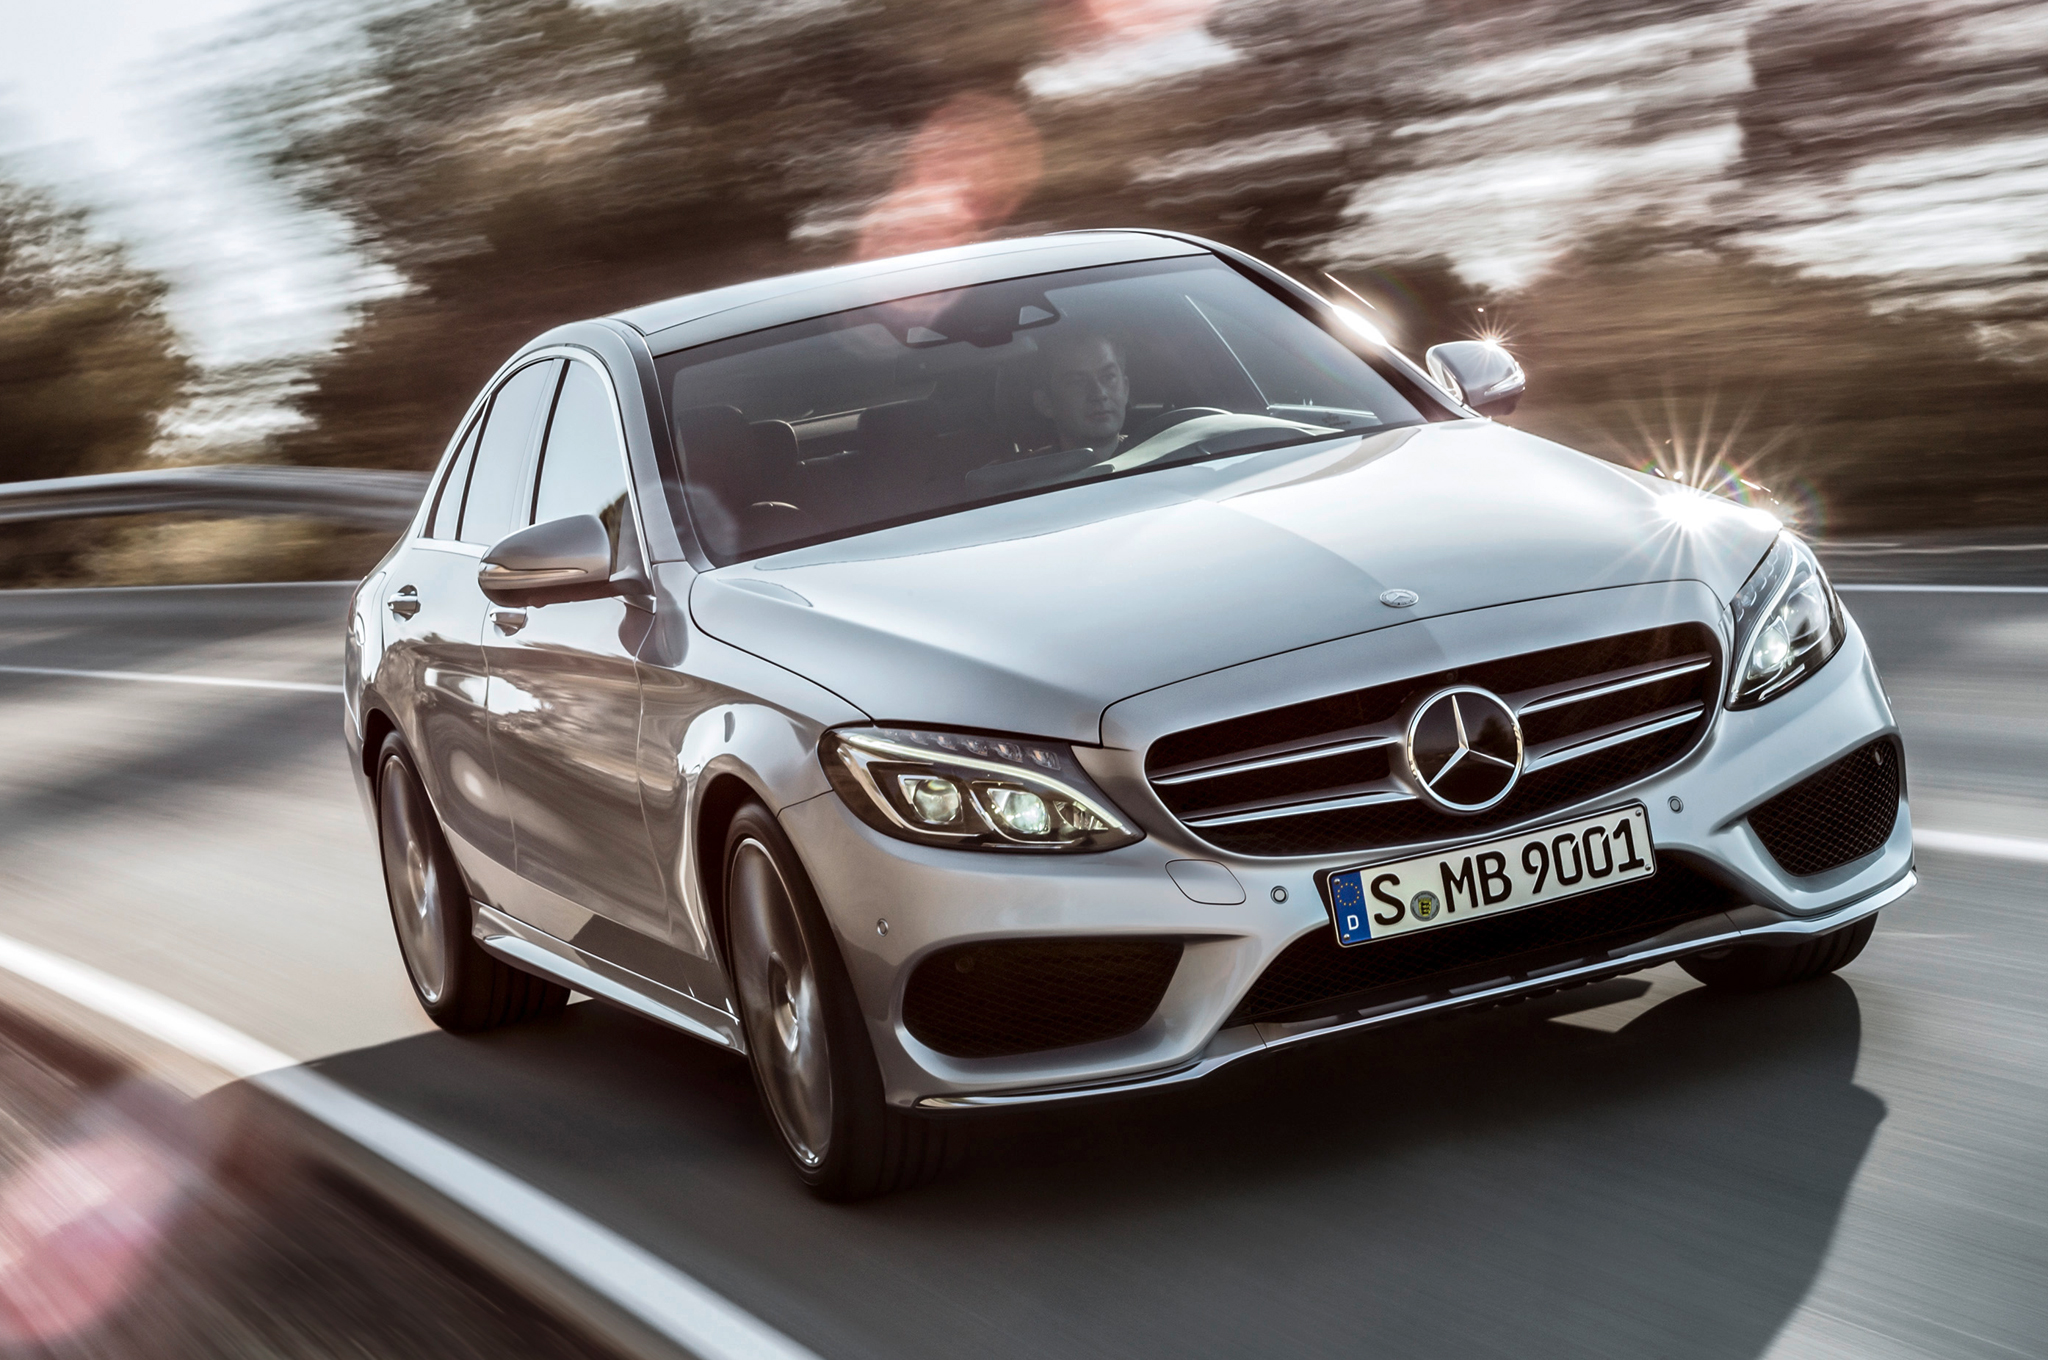 2015-mercedes-benz-c-class-front-three-quarters-in-motion.jpg